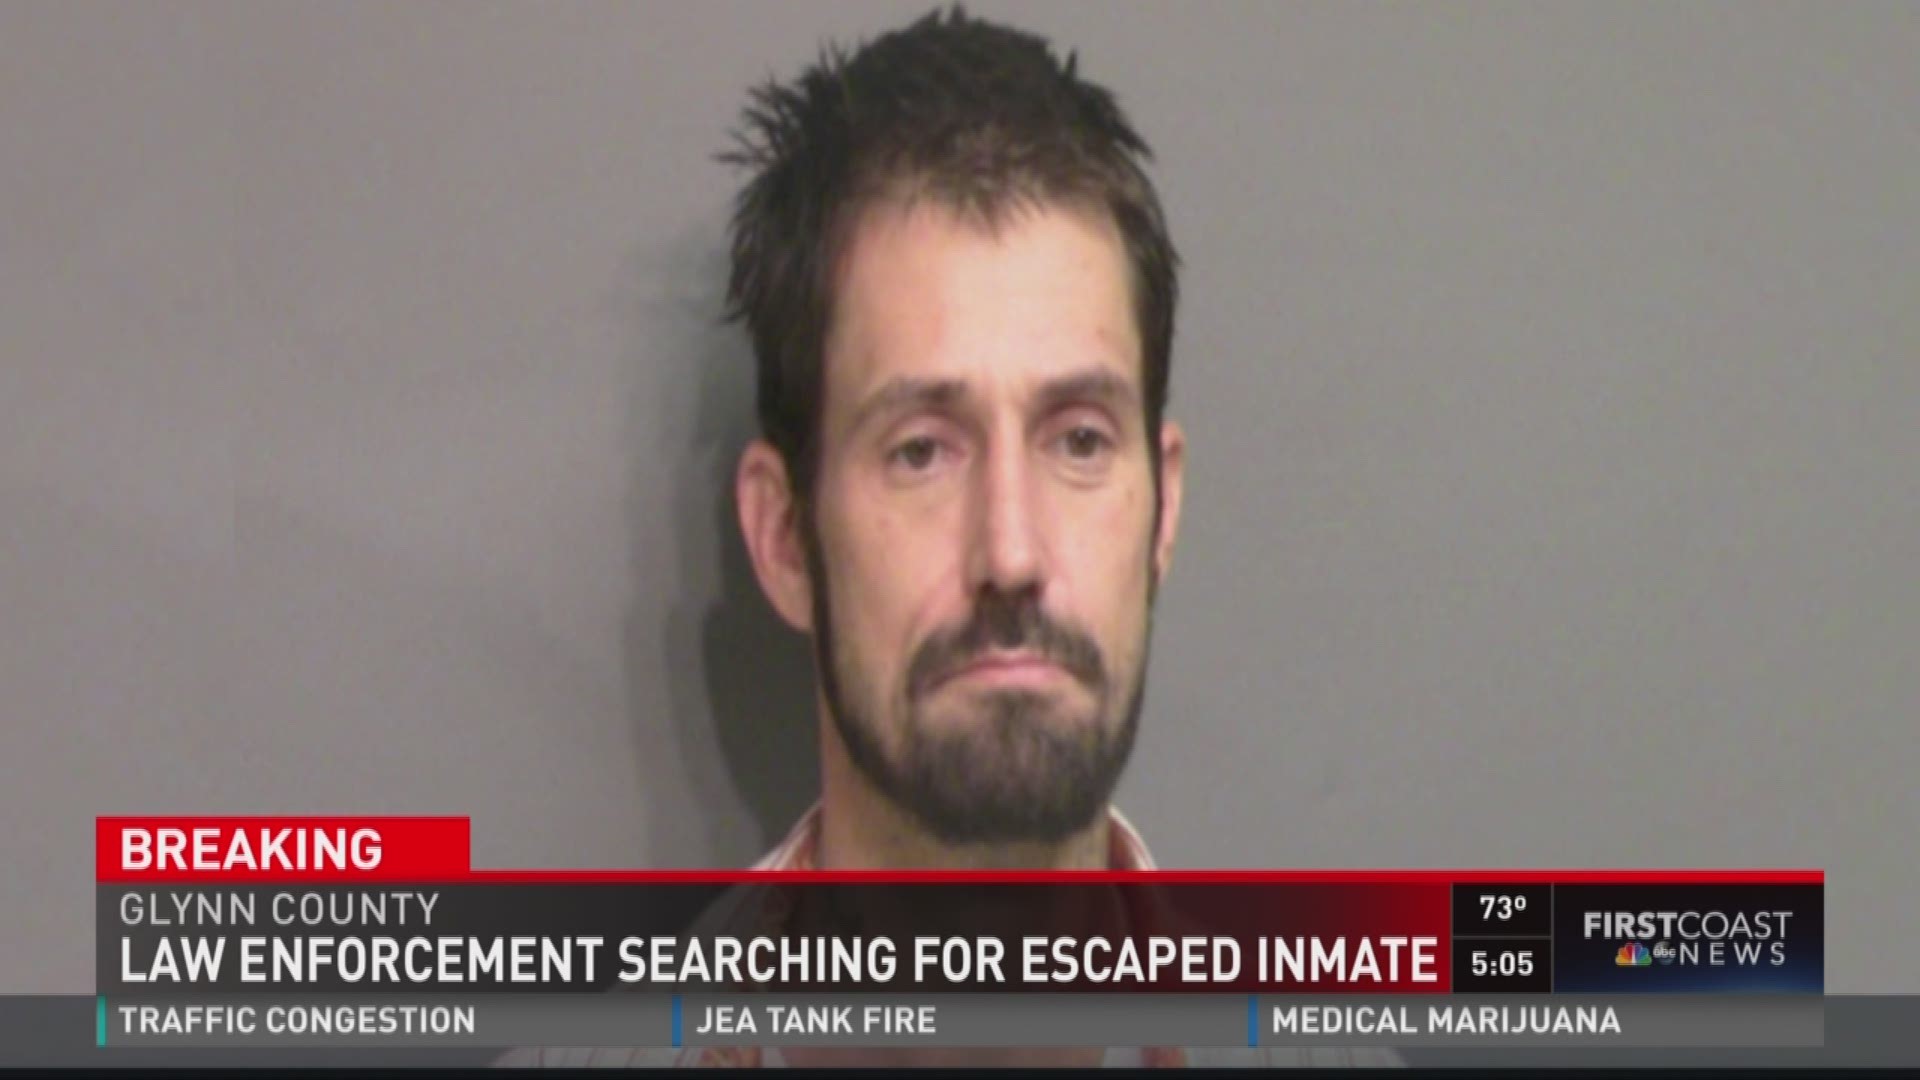 Deputies searching for escaped inmate in Glynn County